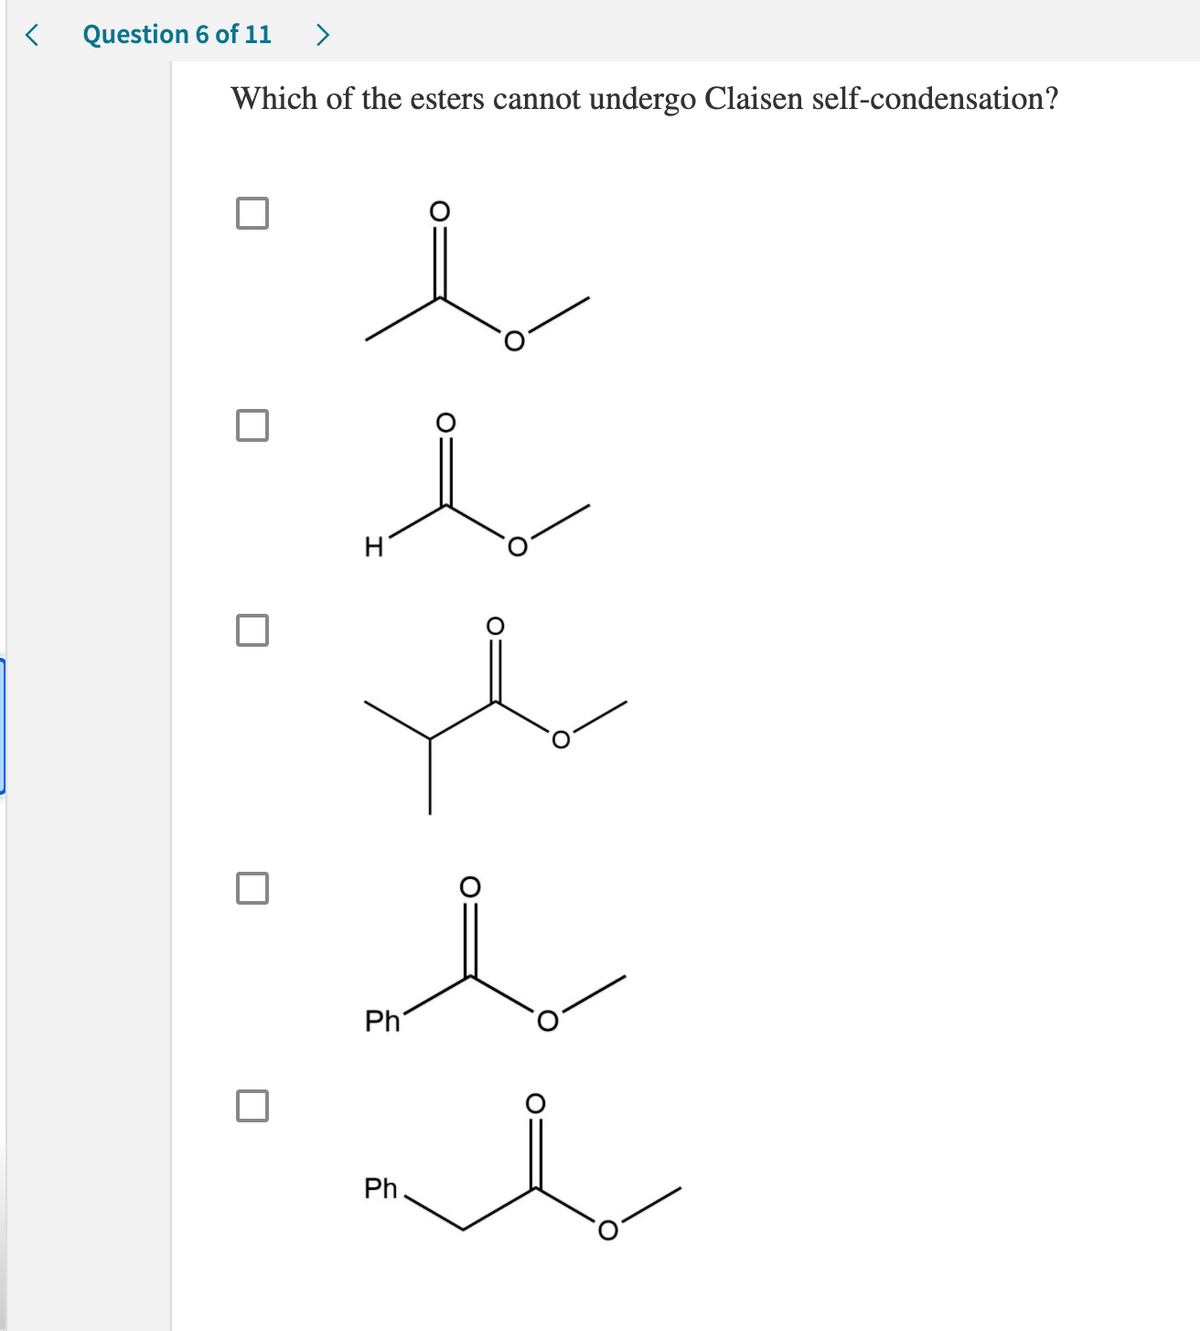 <
Question 6 of 11 >
Which of the esters cannot undergo Claisen self-condensation?
i
U
H
Ph
Ph